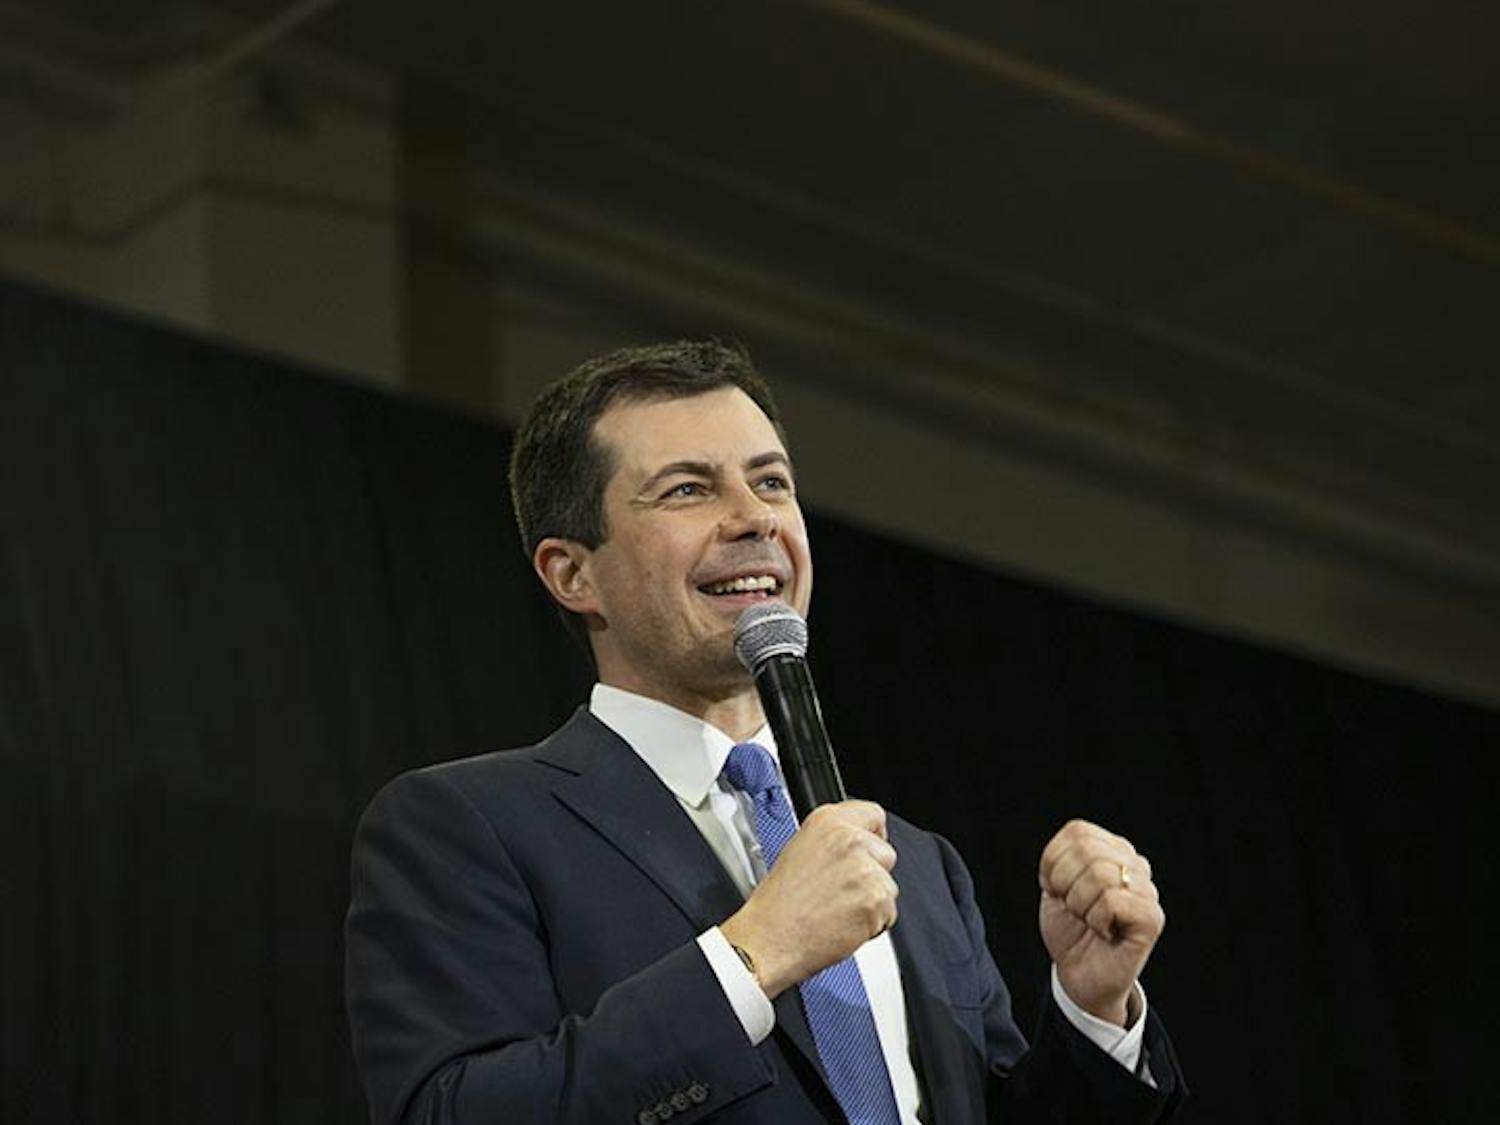 Democratic candidate Pete Buttegieg speaks to the attendees at the Get Out the Vote town hall style forum at a Seven Oaks Park the day before the primaries. Buttigieg answered many questions asked by the forums attendees.&nbsp;